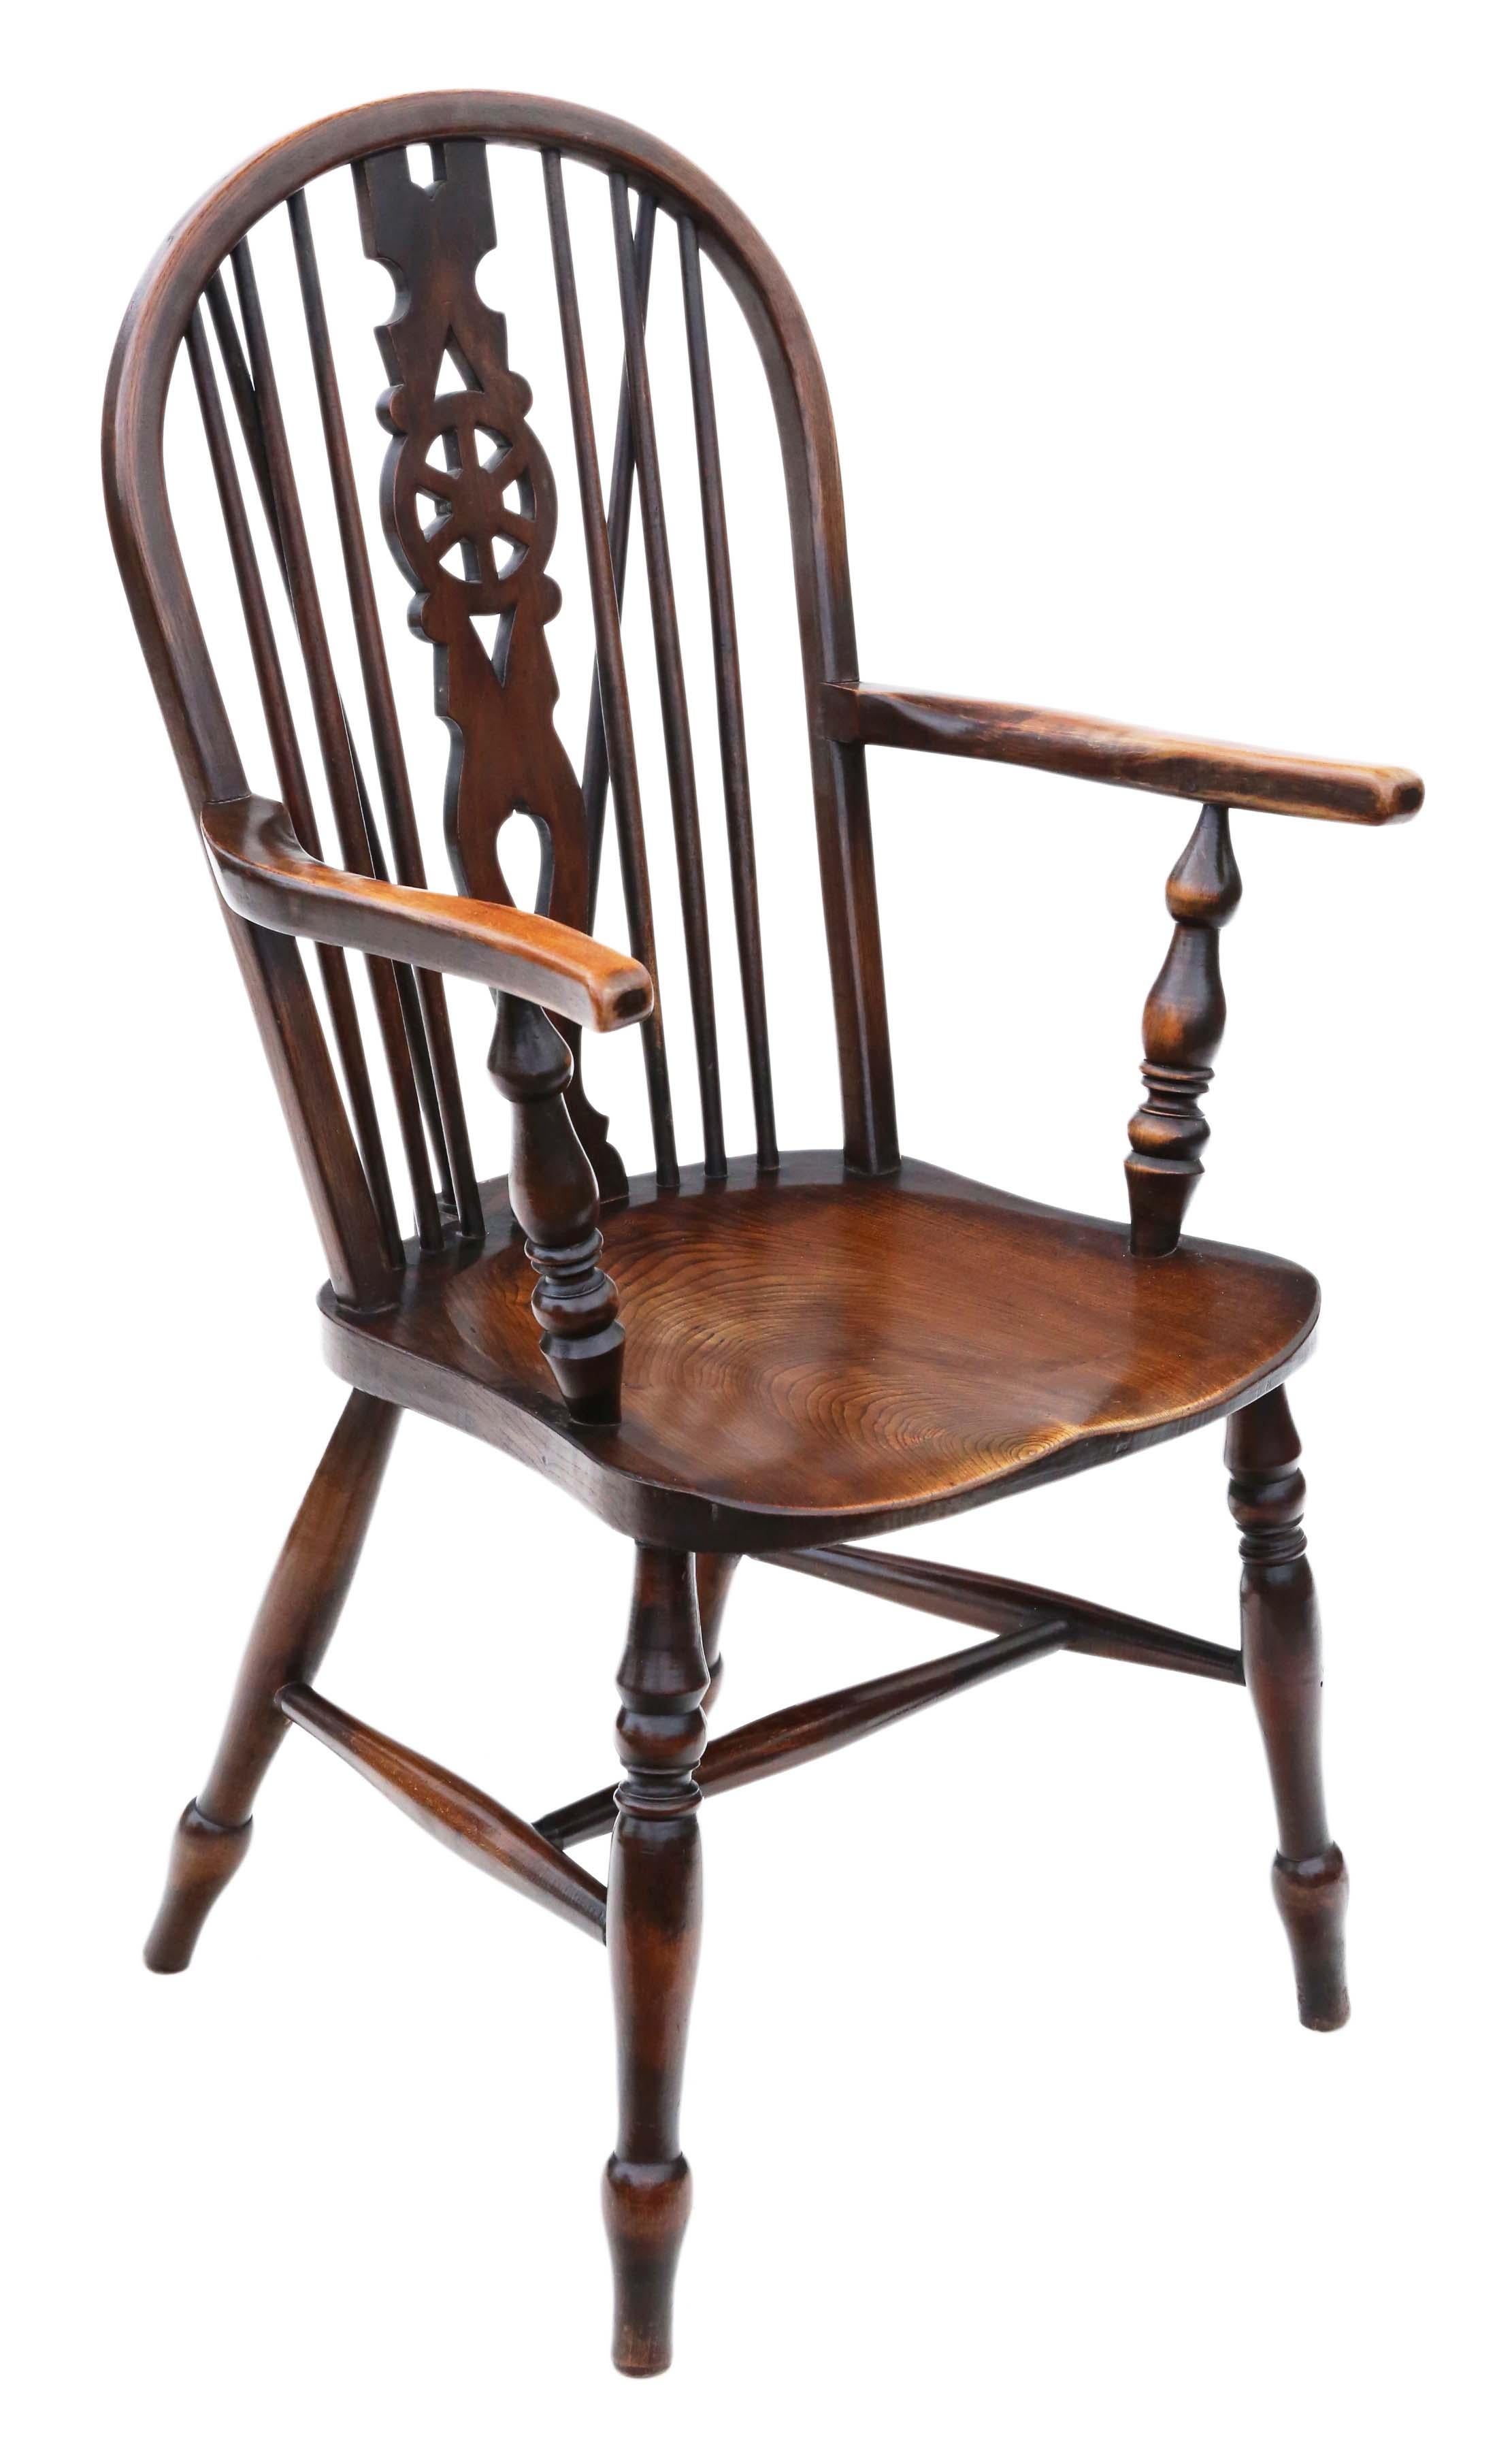 Early 20th Century Antique Victorian C1900 Ash and Elm Windsor Chair Wheel Back Dining Armchair